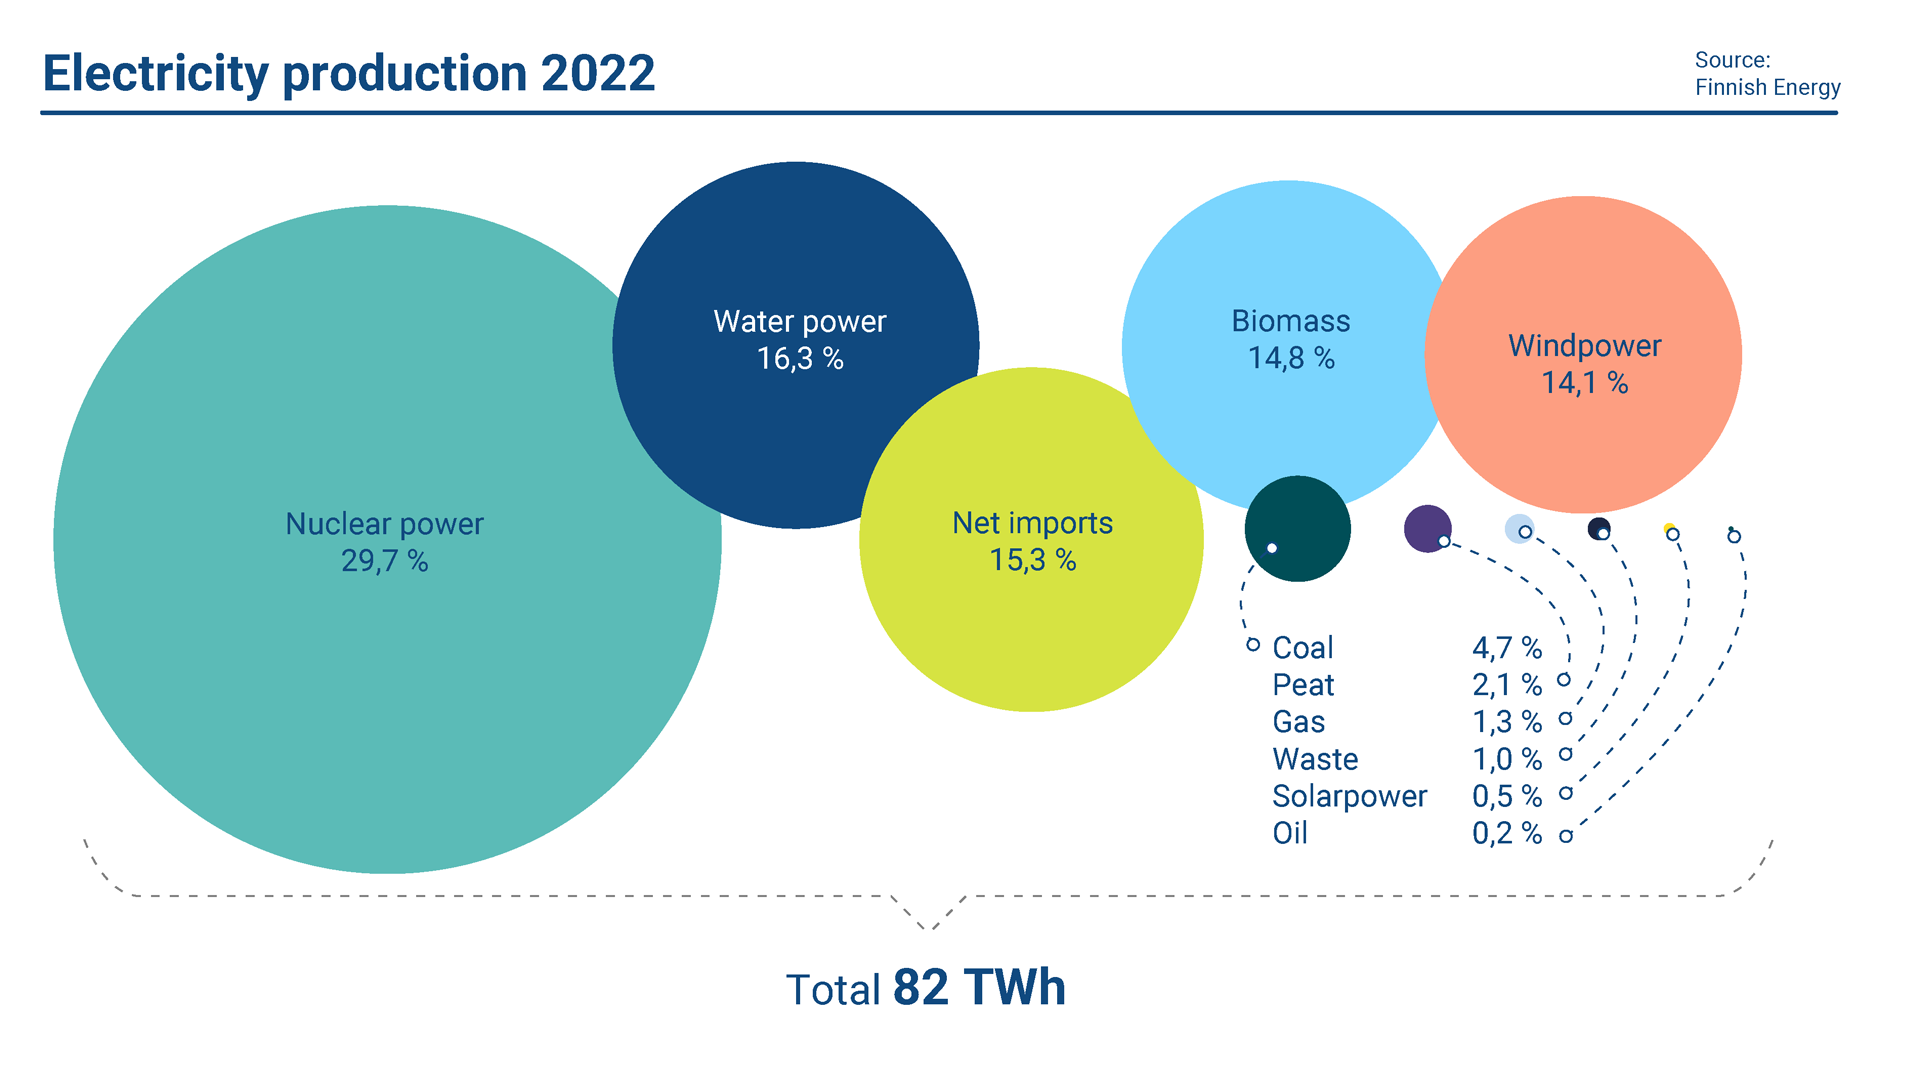 The image shows Finland's electricity production in 2022.